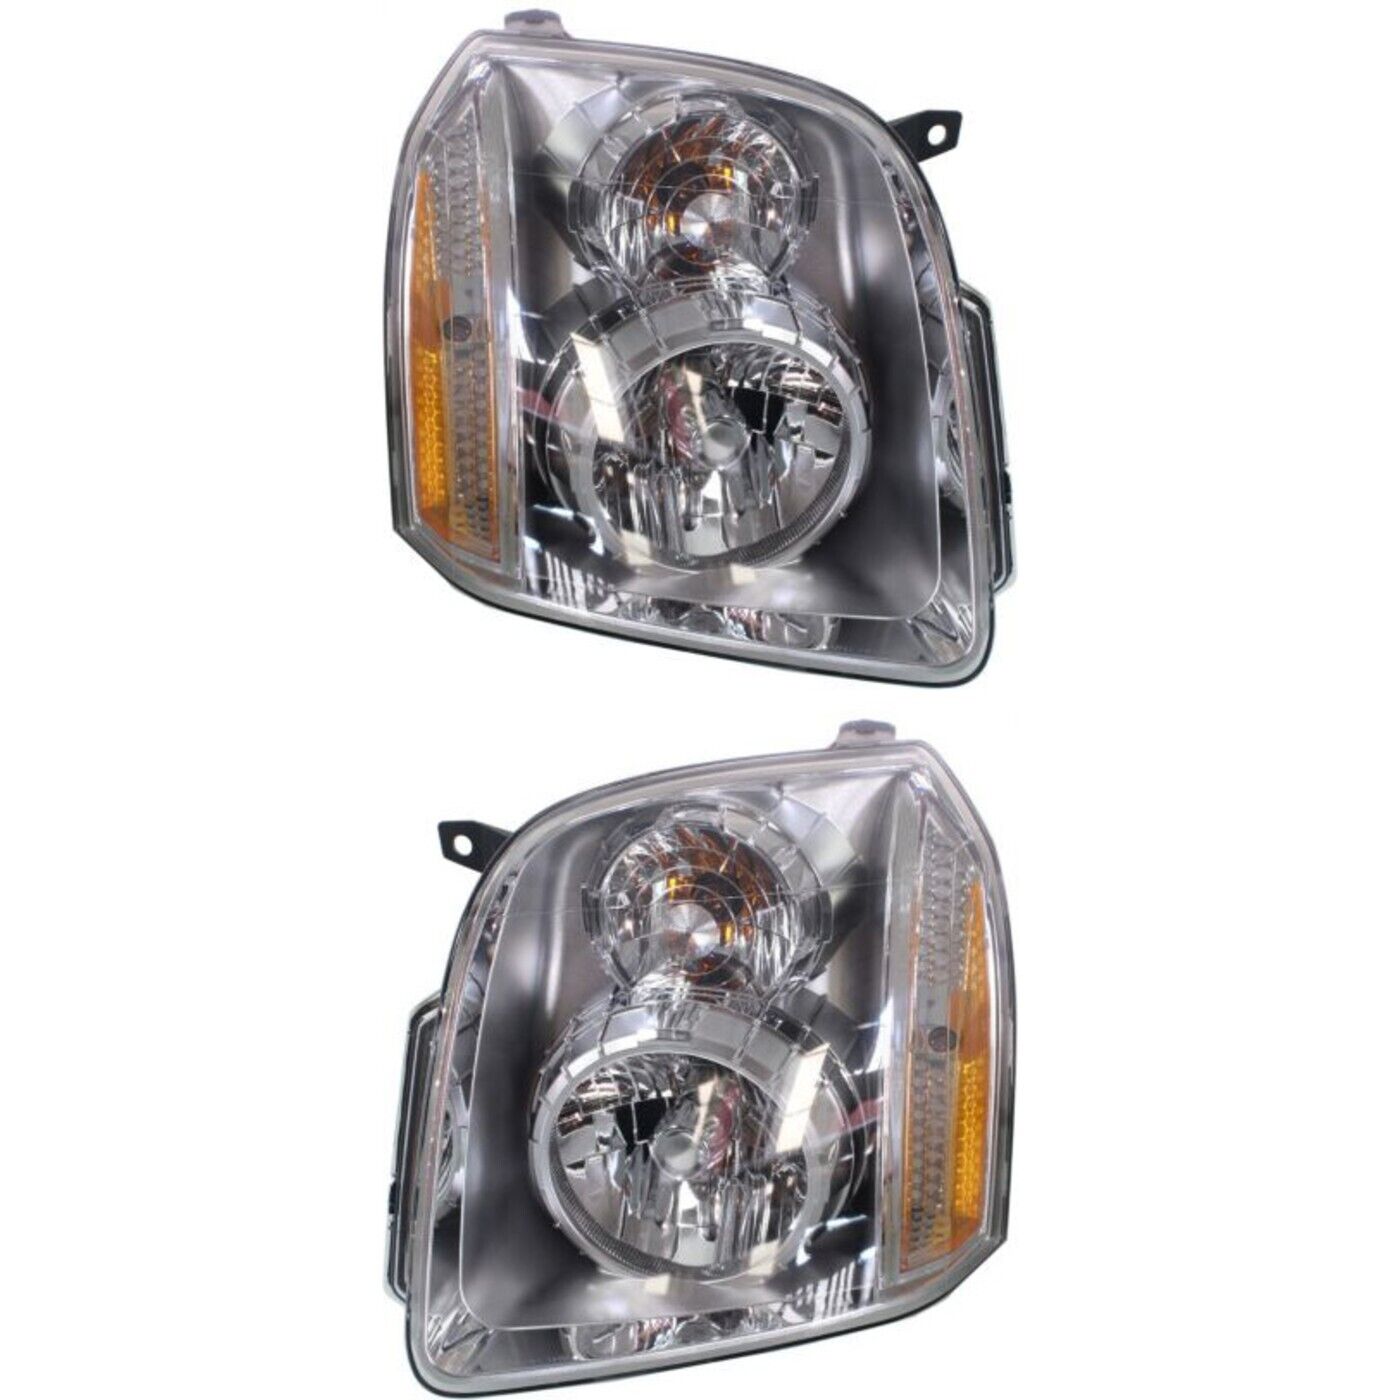 Headlight Assembly Set For 2007-2014 GMC Yukon Denali Left and Right With Bulb